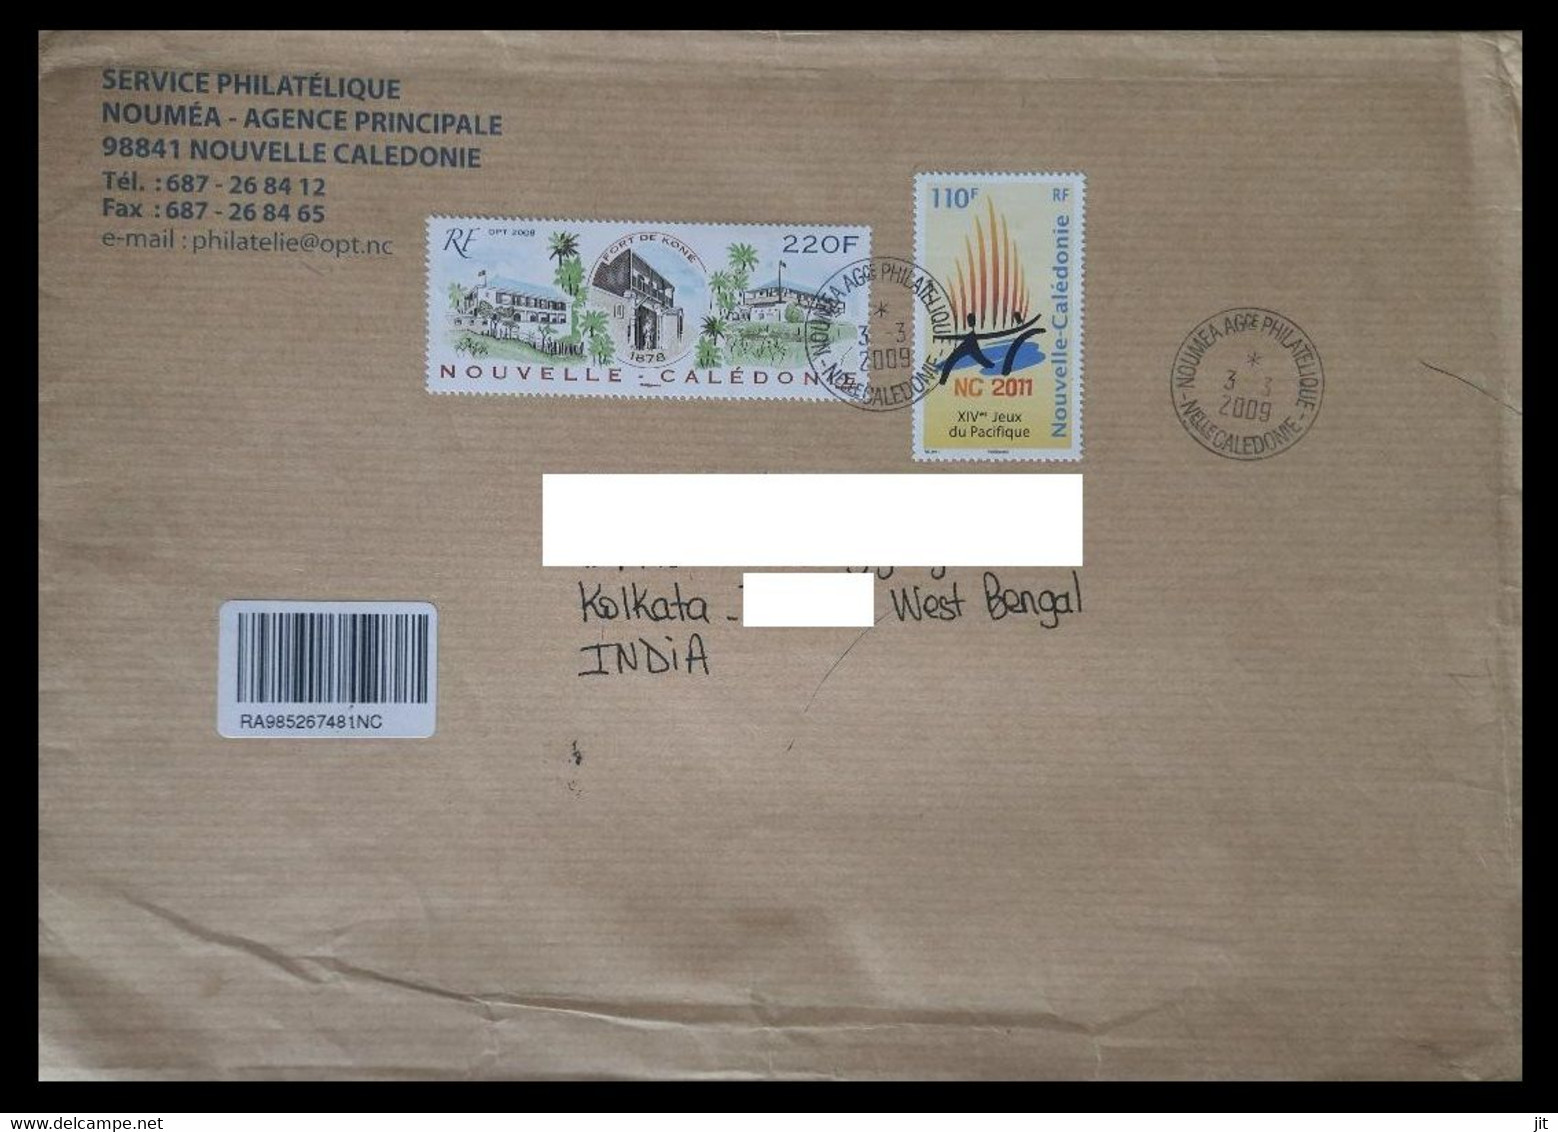 165.NEW CALEDONIA 2009 USED REGISTERED AIRMAIL COVER TO INDIA WITH (02) STAMPS . - Ganzsachen